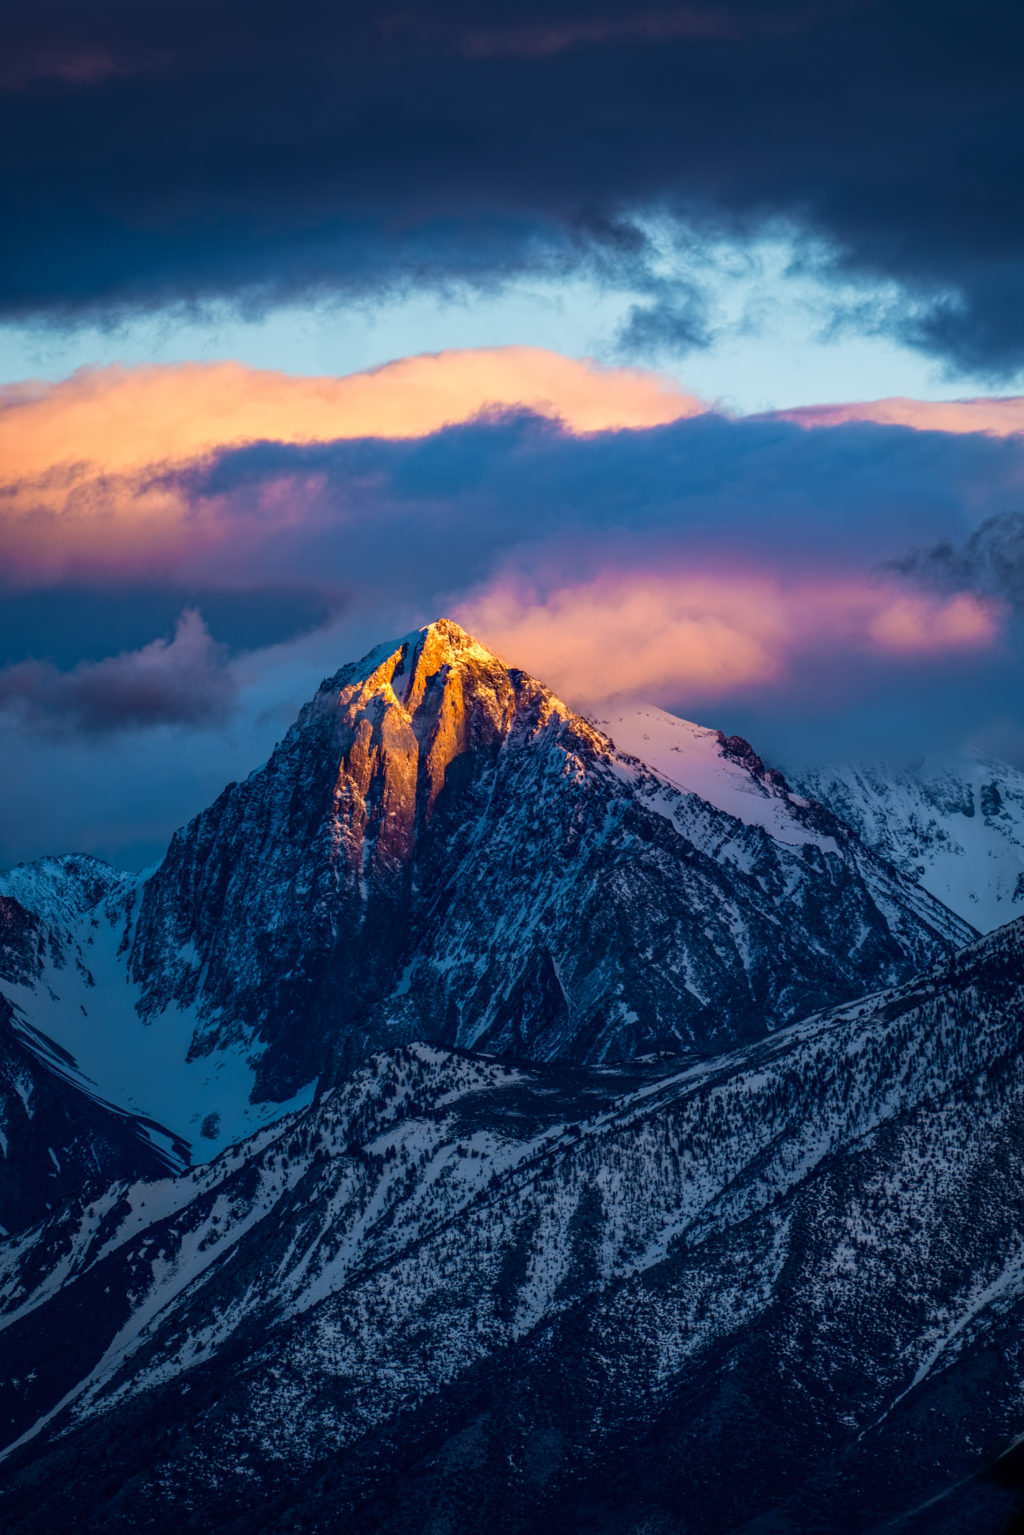 Mt. Morgan, California: Photo by Andy Best: Photo by Andy Best